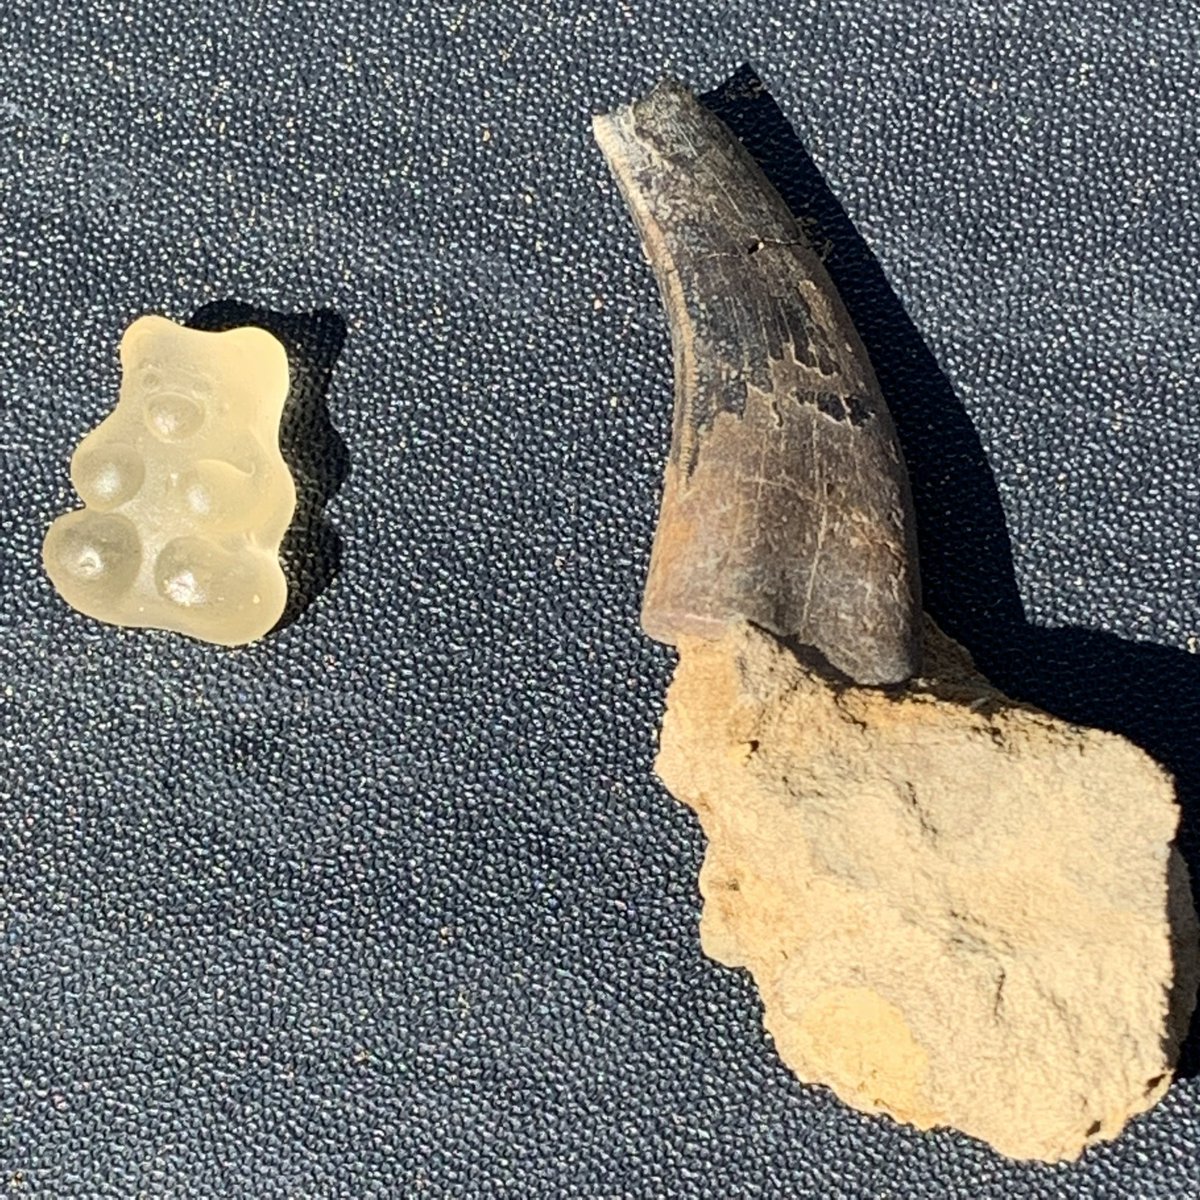 Aloha and happy #FossilFriday Here’s a theropod tooth I recovered in the Lance Creek Formation of Wyoming. I looked for over an hour to find the broken tip 😭 Gummy bear for scale.